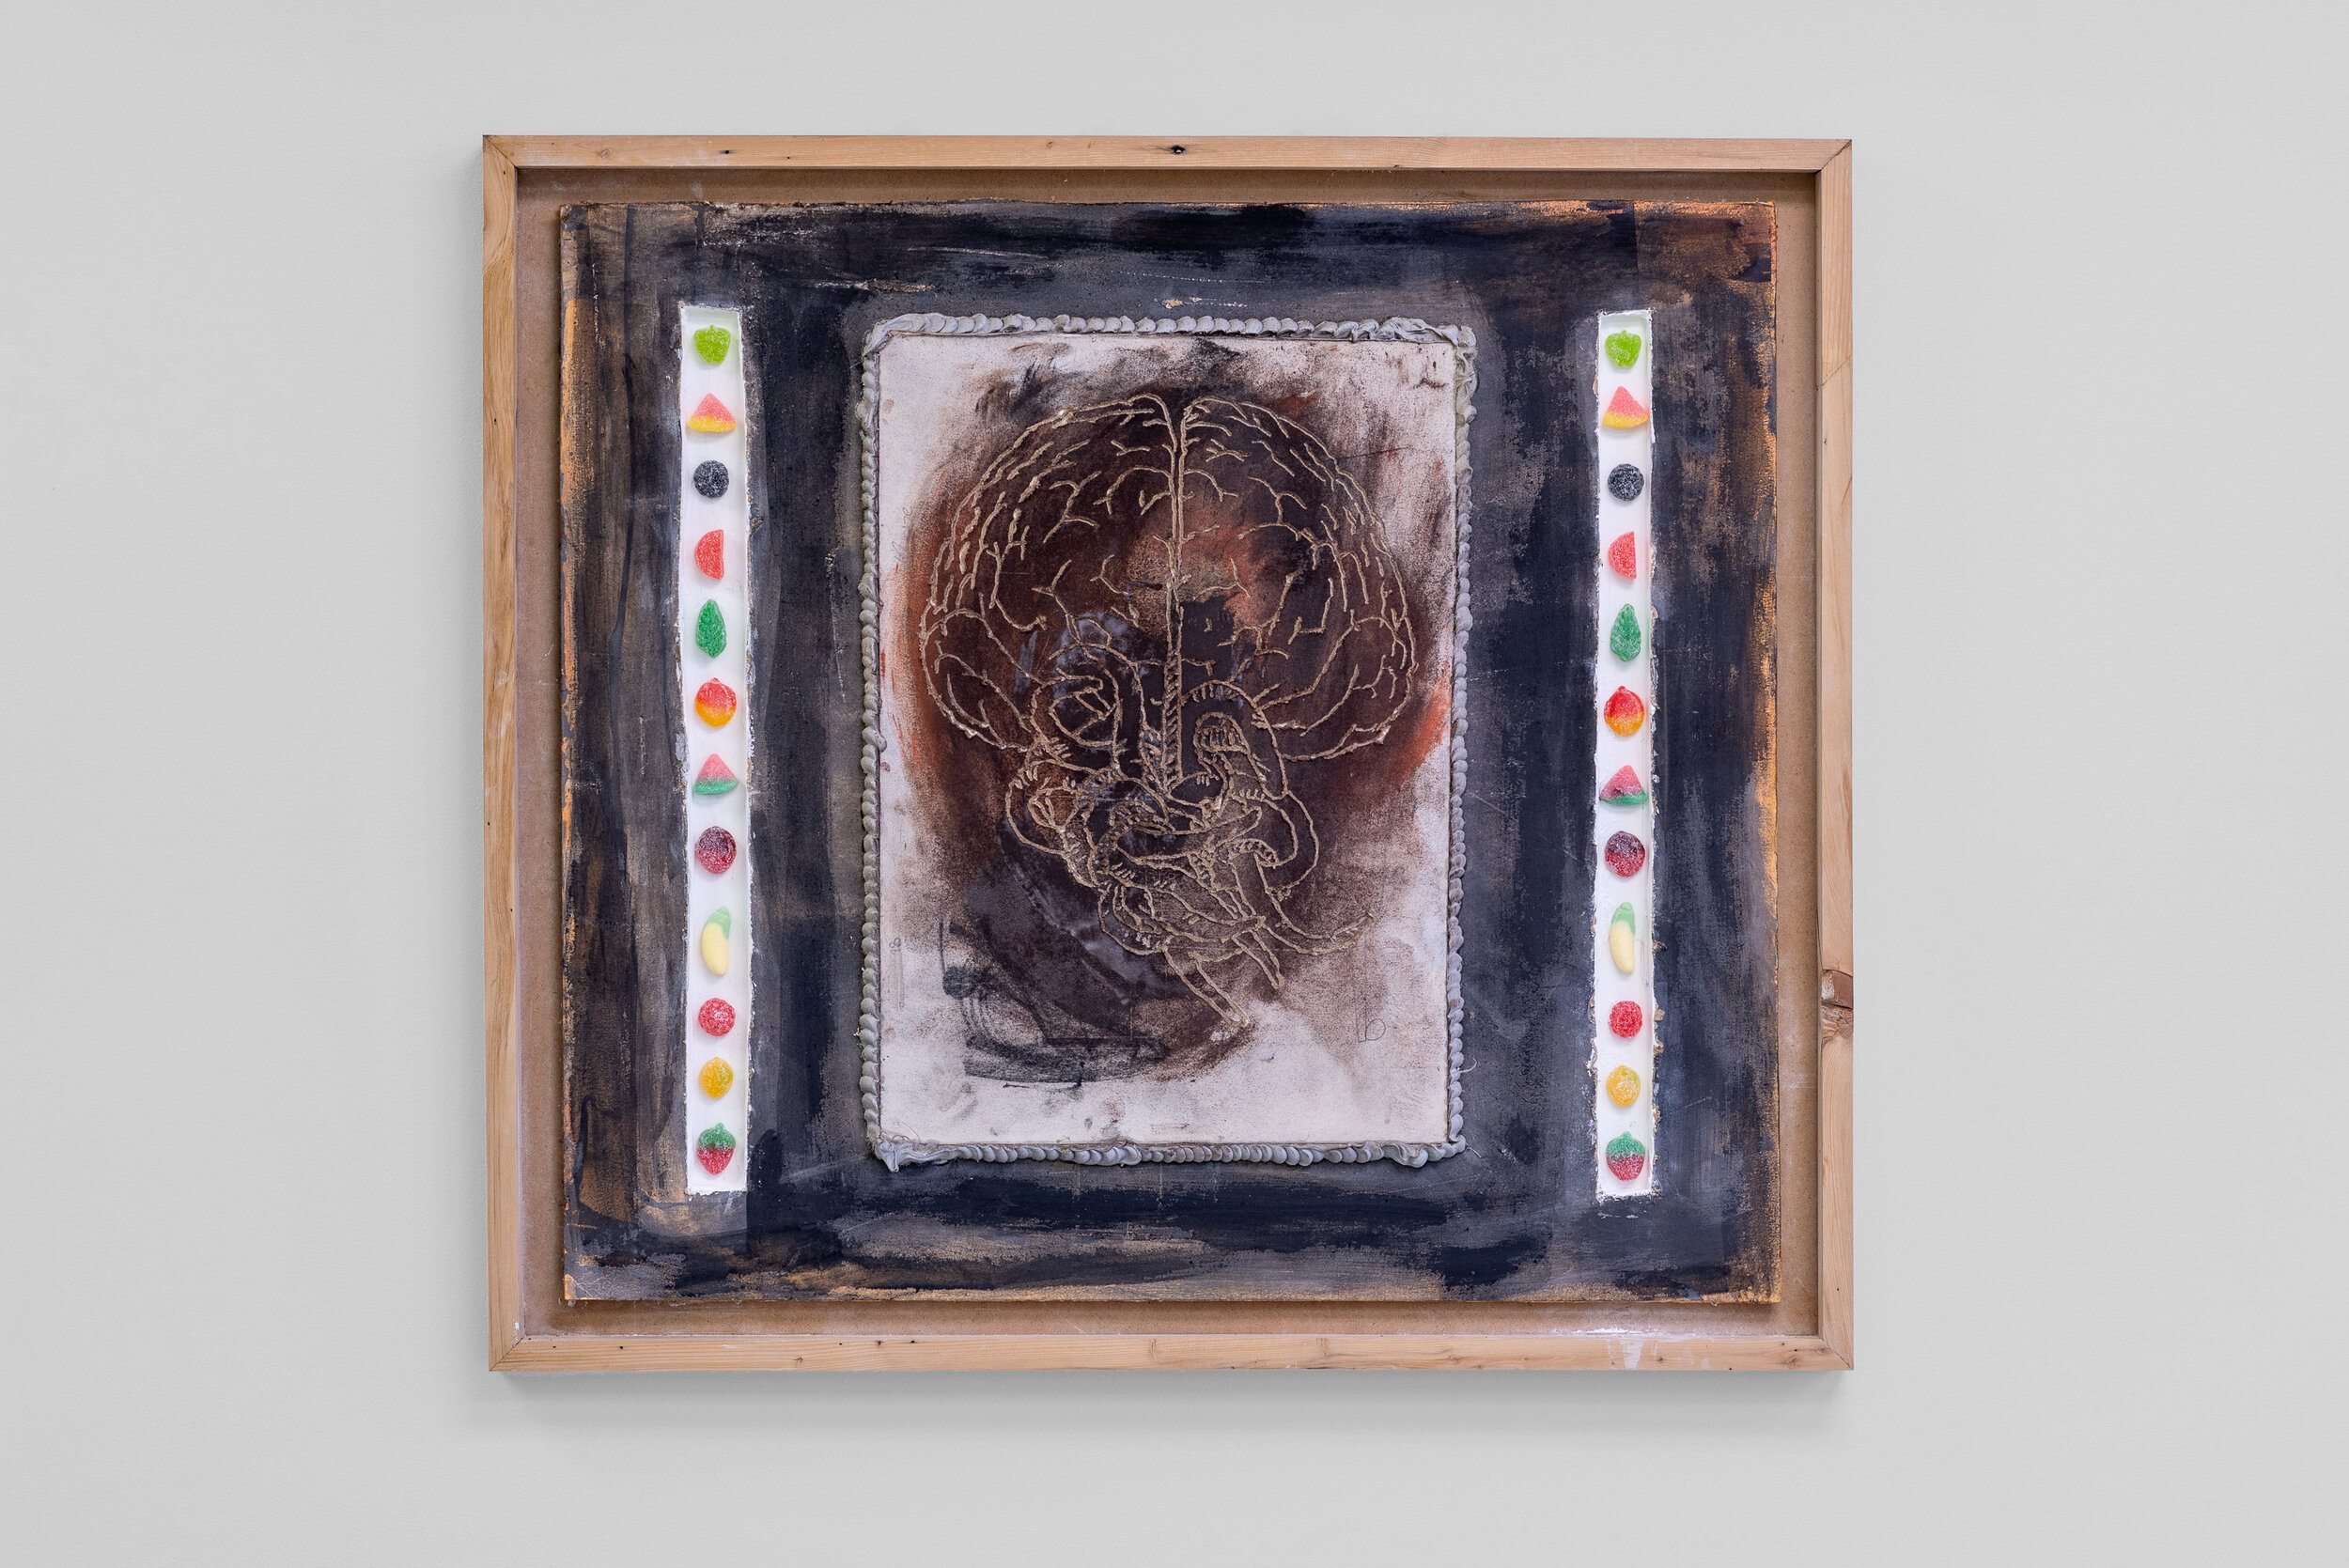  Craig Spence, ​ mTBI #4,  ​mixed media on sheetrock and artist made wooden frame, 2019  